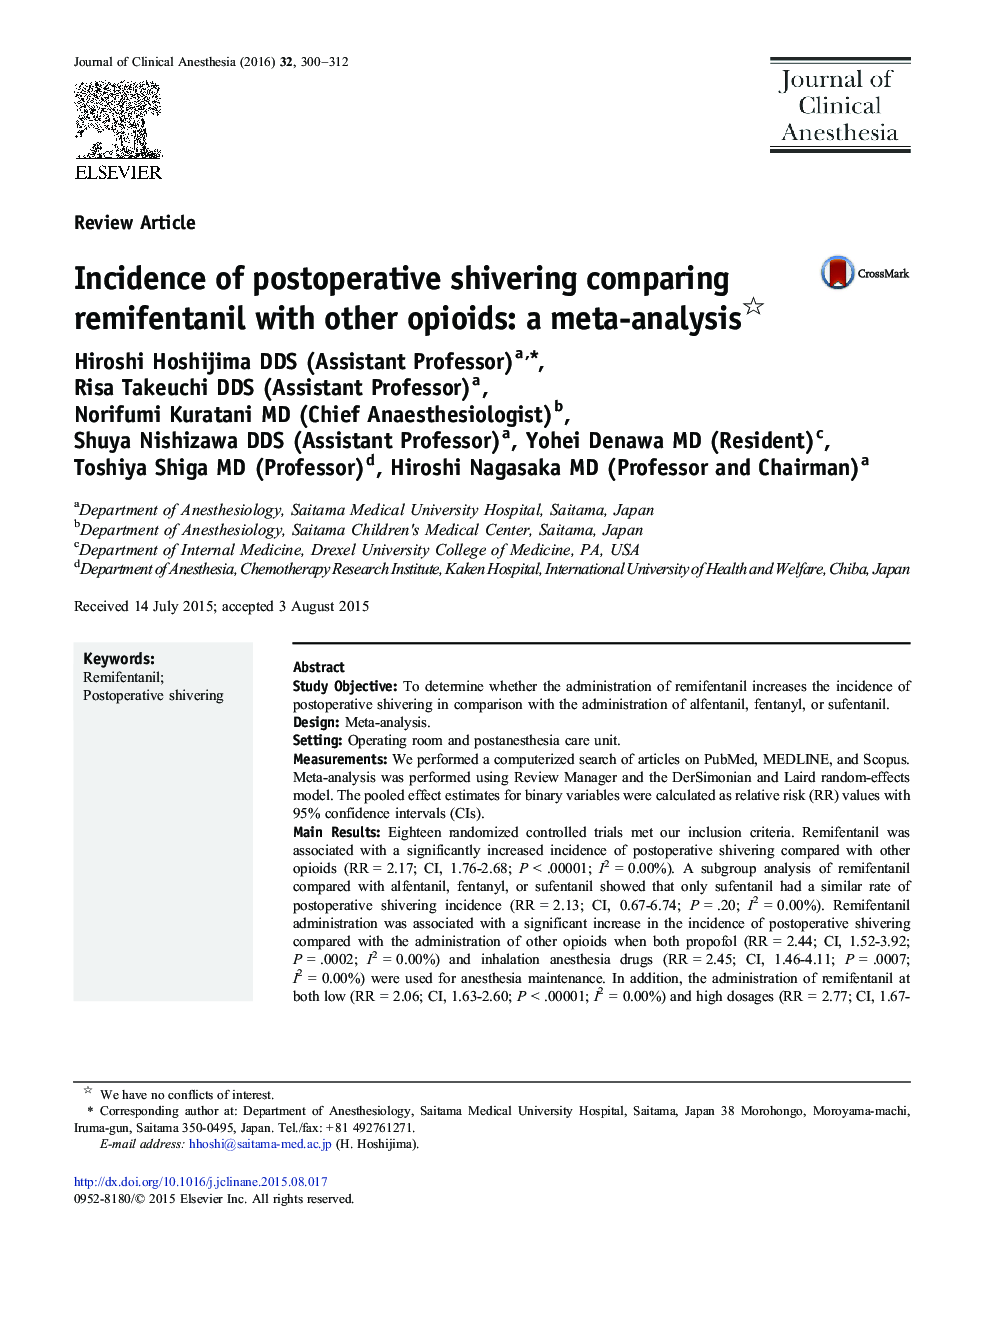 Review ArticleIncidence of postoperative shivering comparing remifentanil with other opioids: a meta-analysis